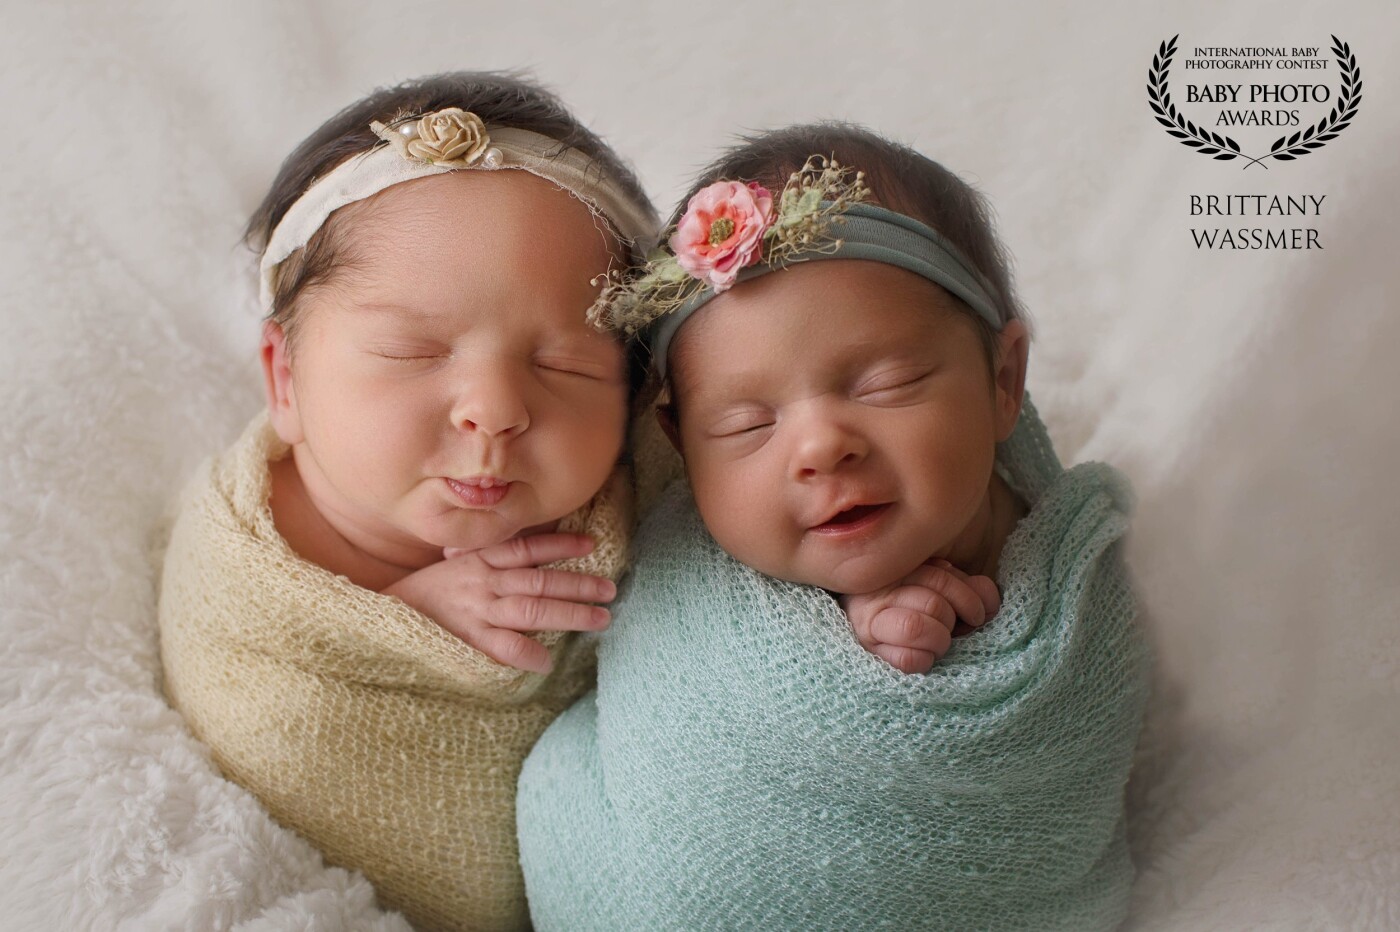 These two di-di twins gave me the best snuggles in my studio. Mom and Dad had them tested to find out if they are identical, and yes, they are! These girls are also a sweet answer to prayer as rainbow babies after Mom lost her first pregnancy a year earlier. I absolutely love working with multiples, even if it's twice the work! 